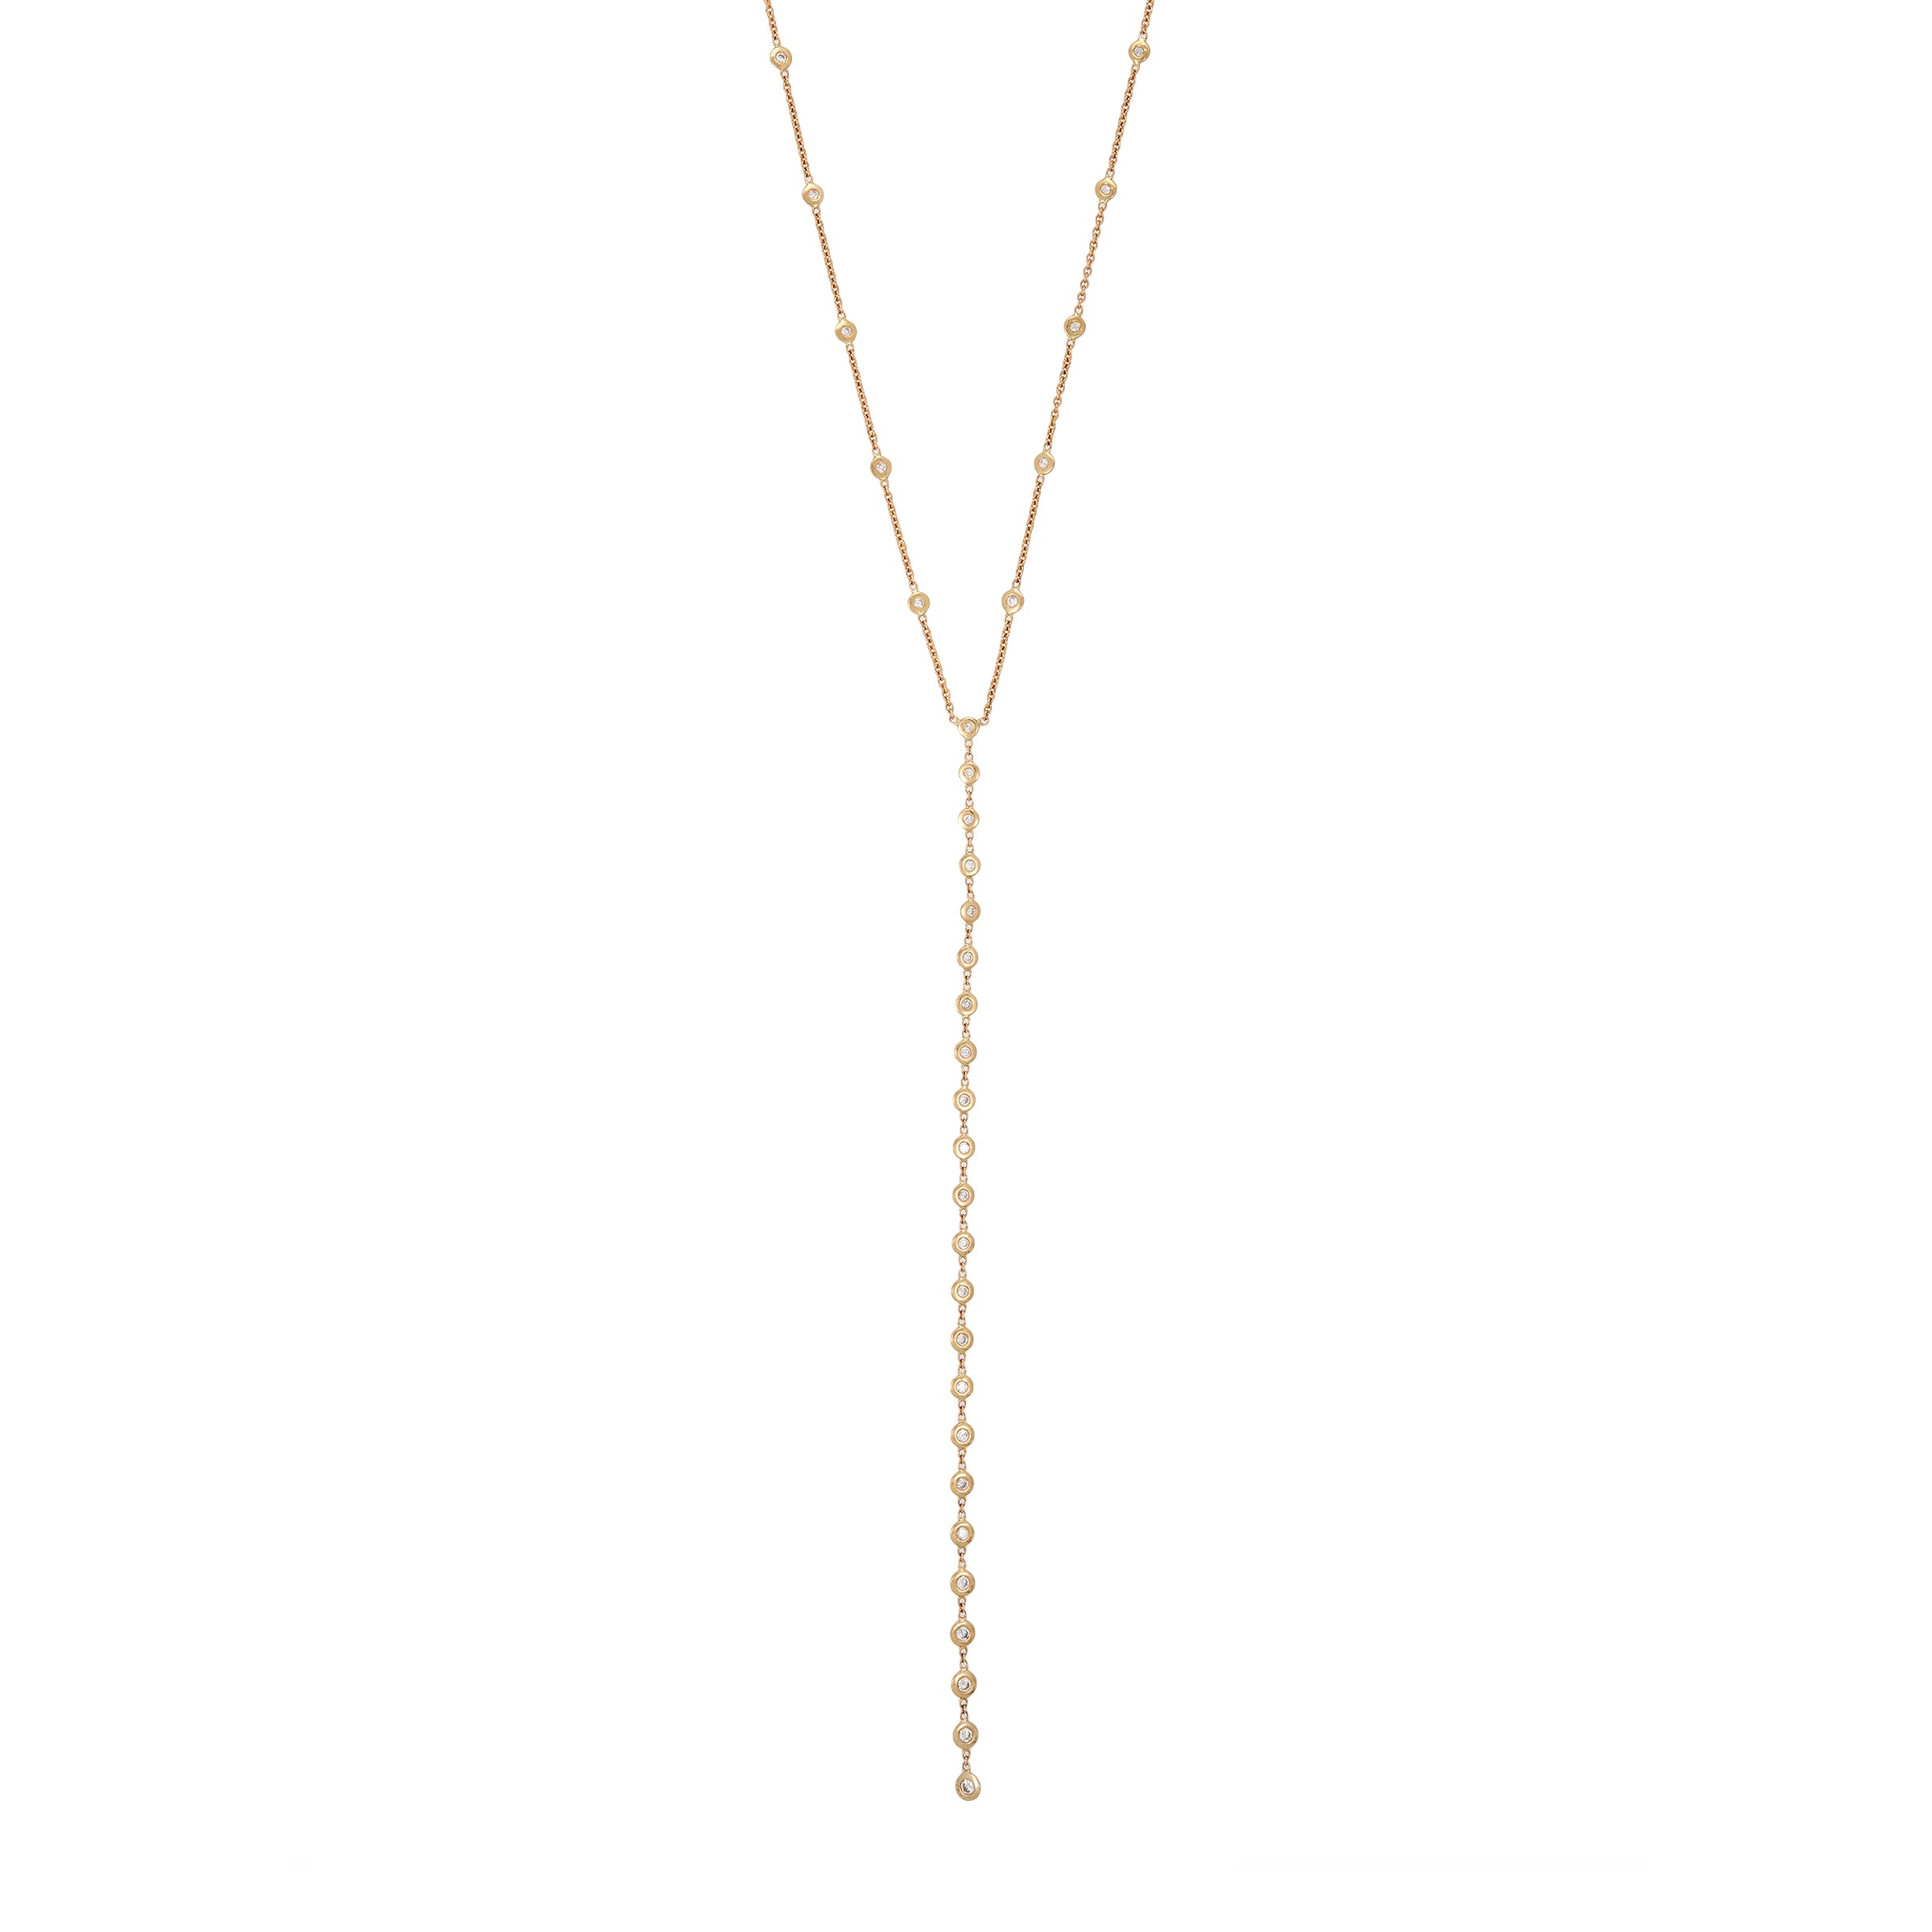 SPACED OUT DIAMOND + 23 GRADUATED DIAMOND Y NECKLACE